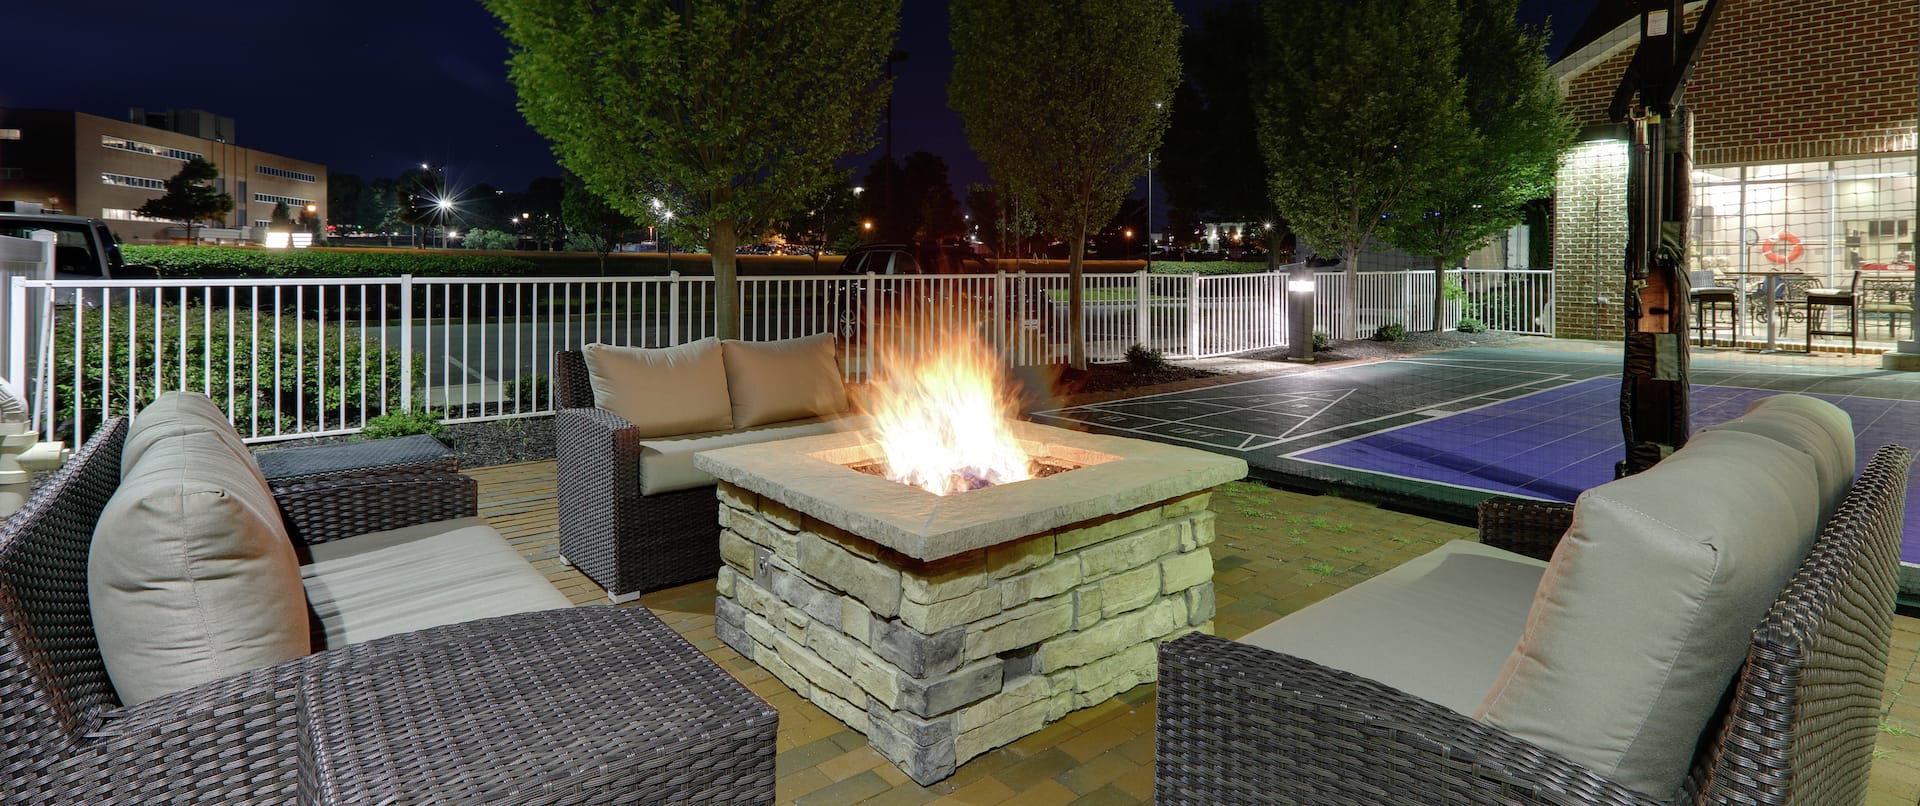 Patio and Firepit at Night